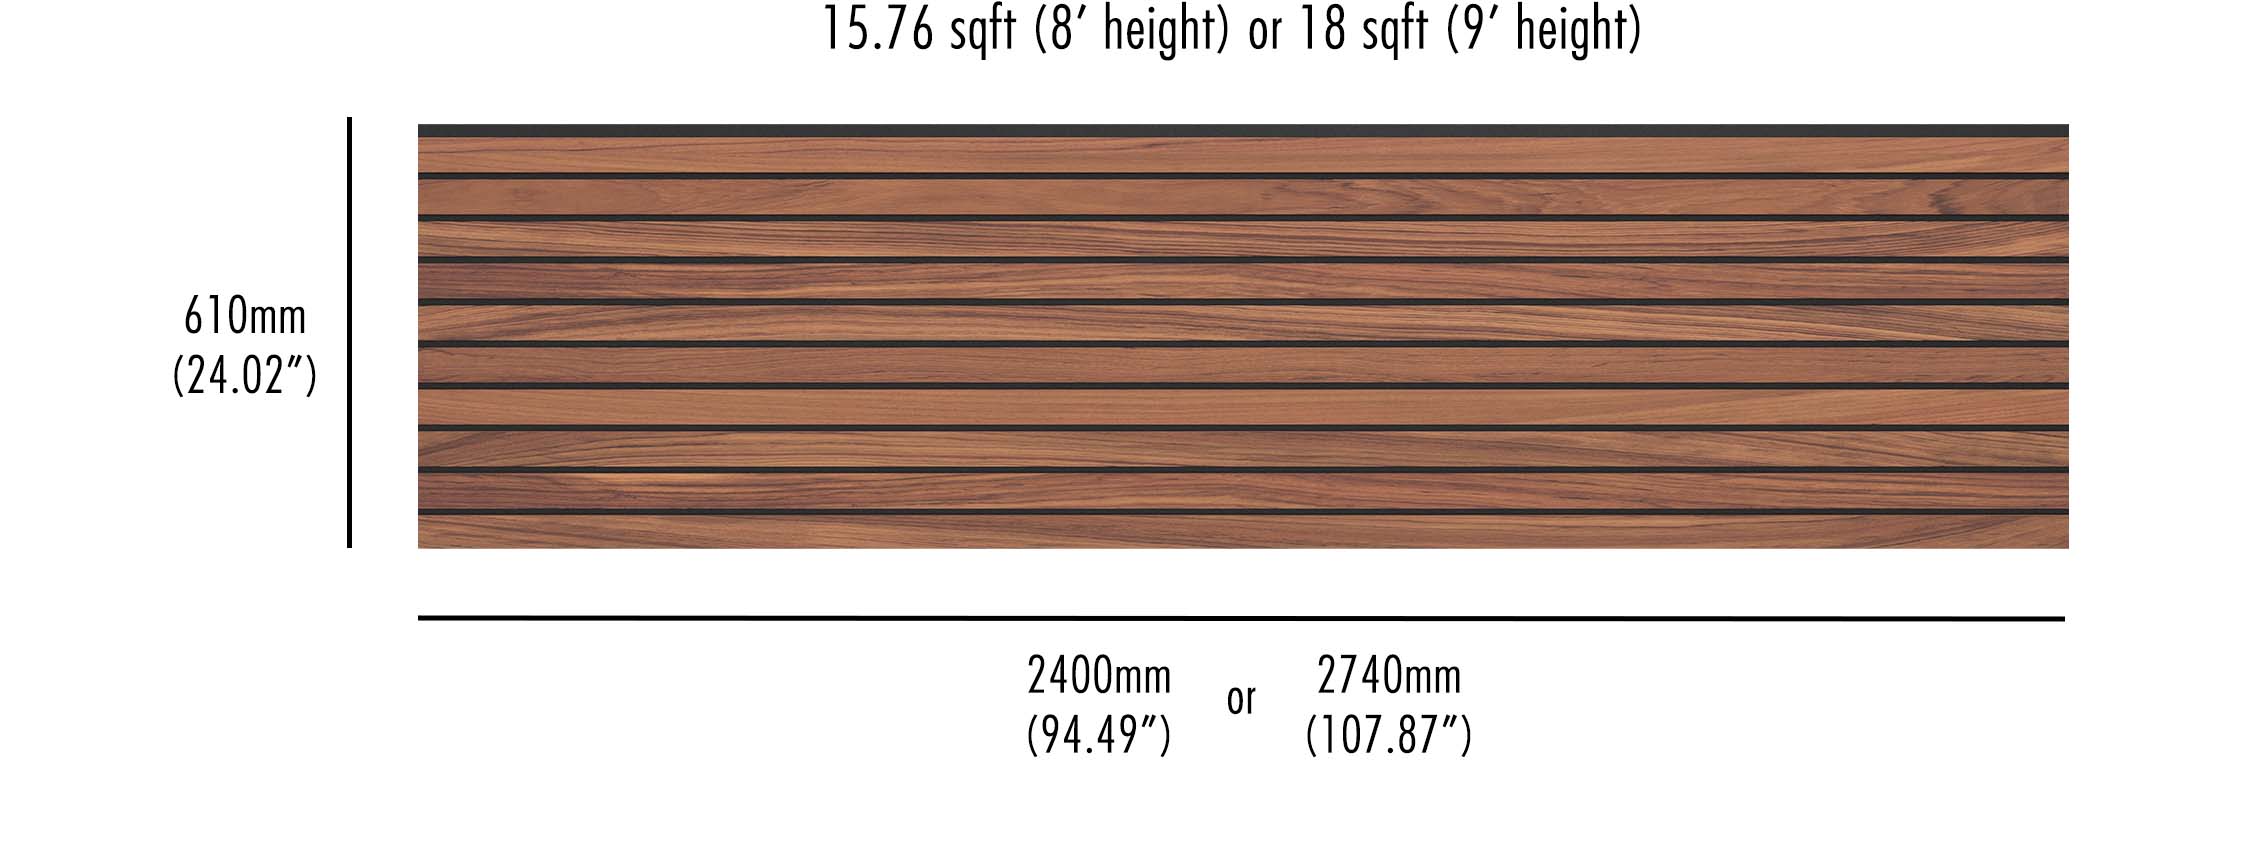 A size chart for horizontal wide walnut panels, detailing 610mm height and width options of 2400mm and 2740mm for area coverage.